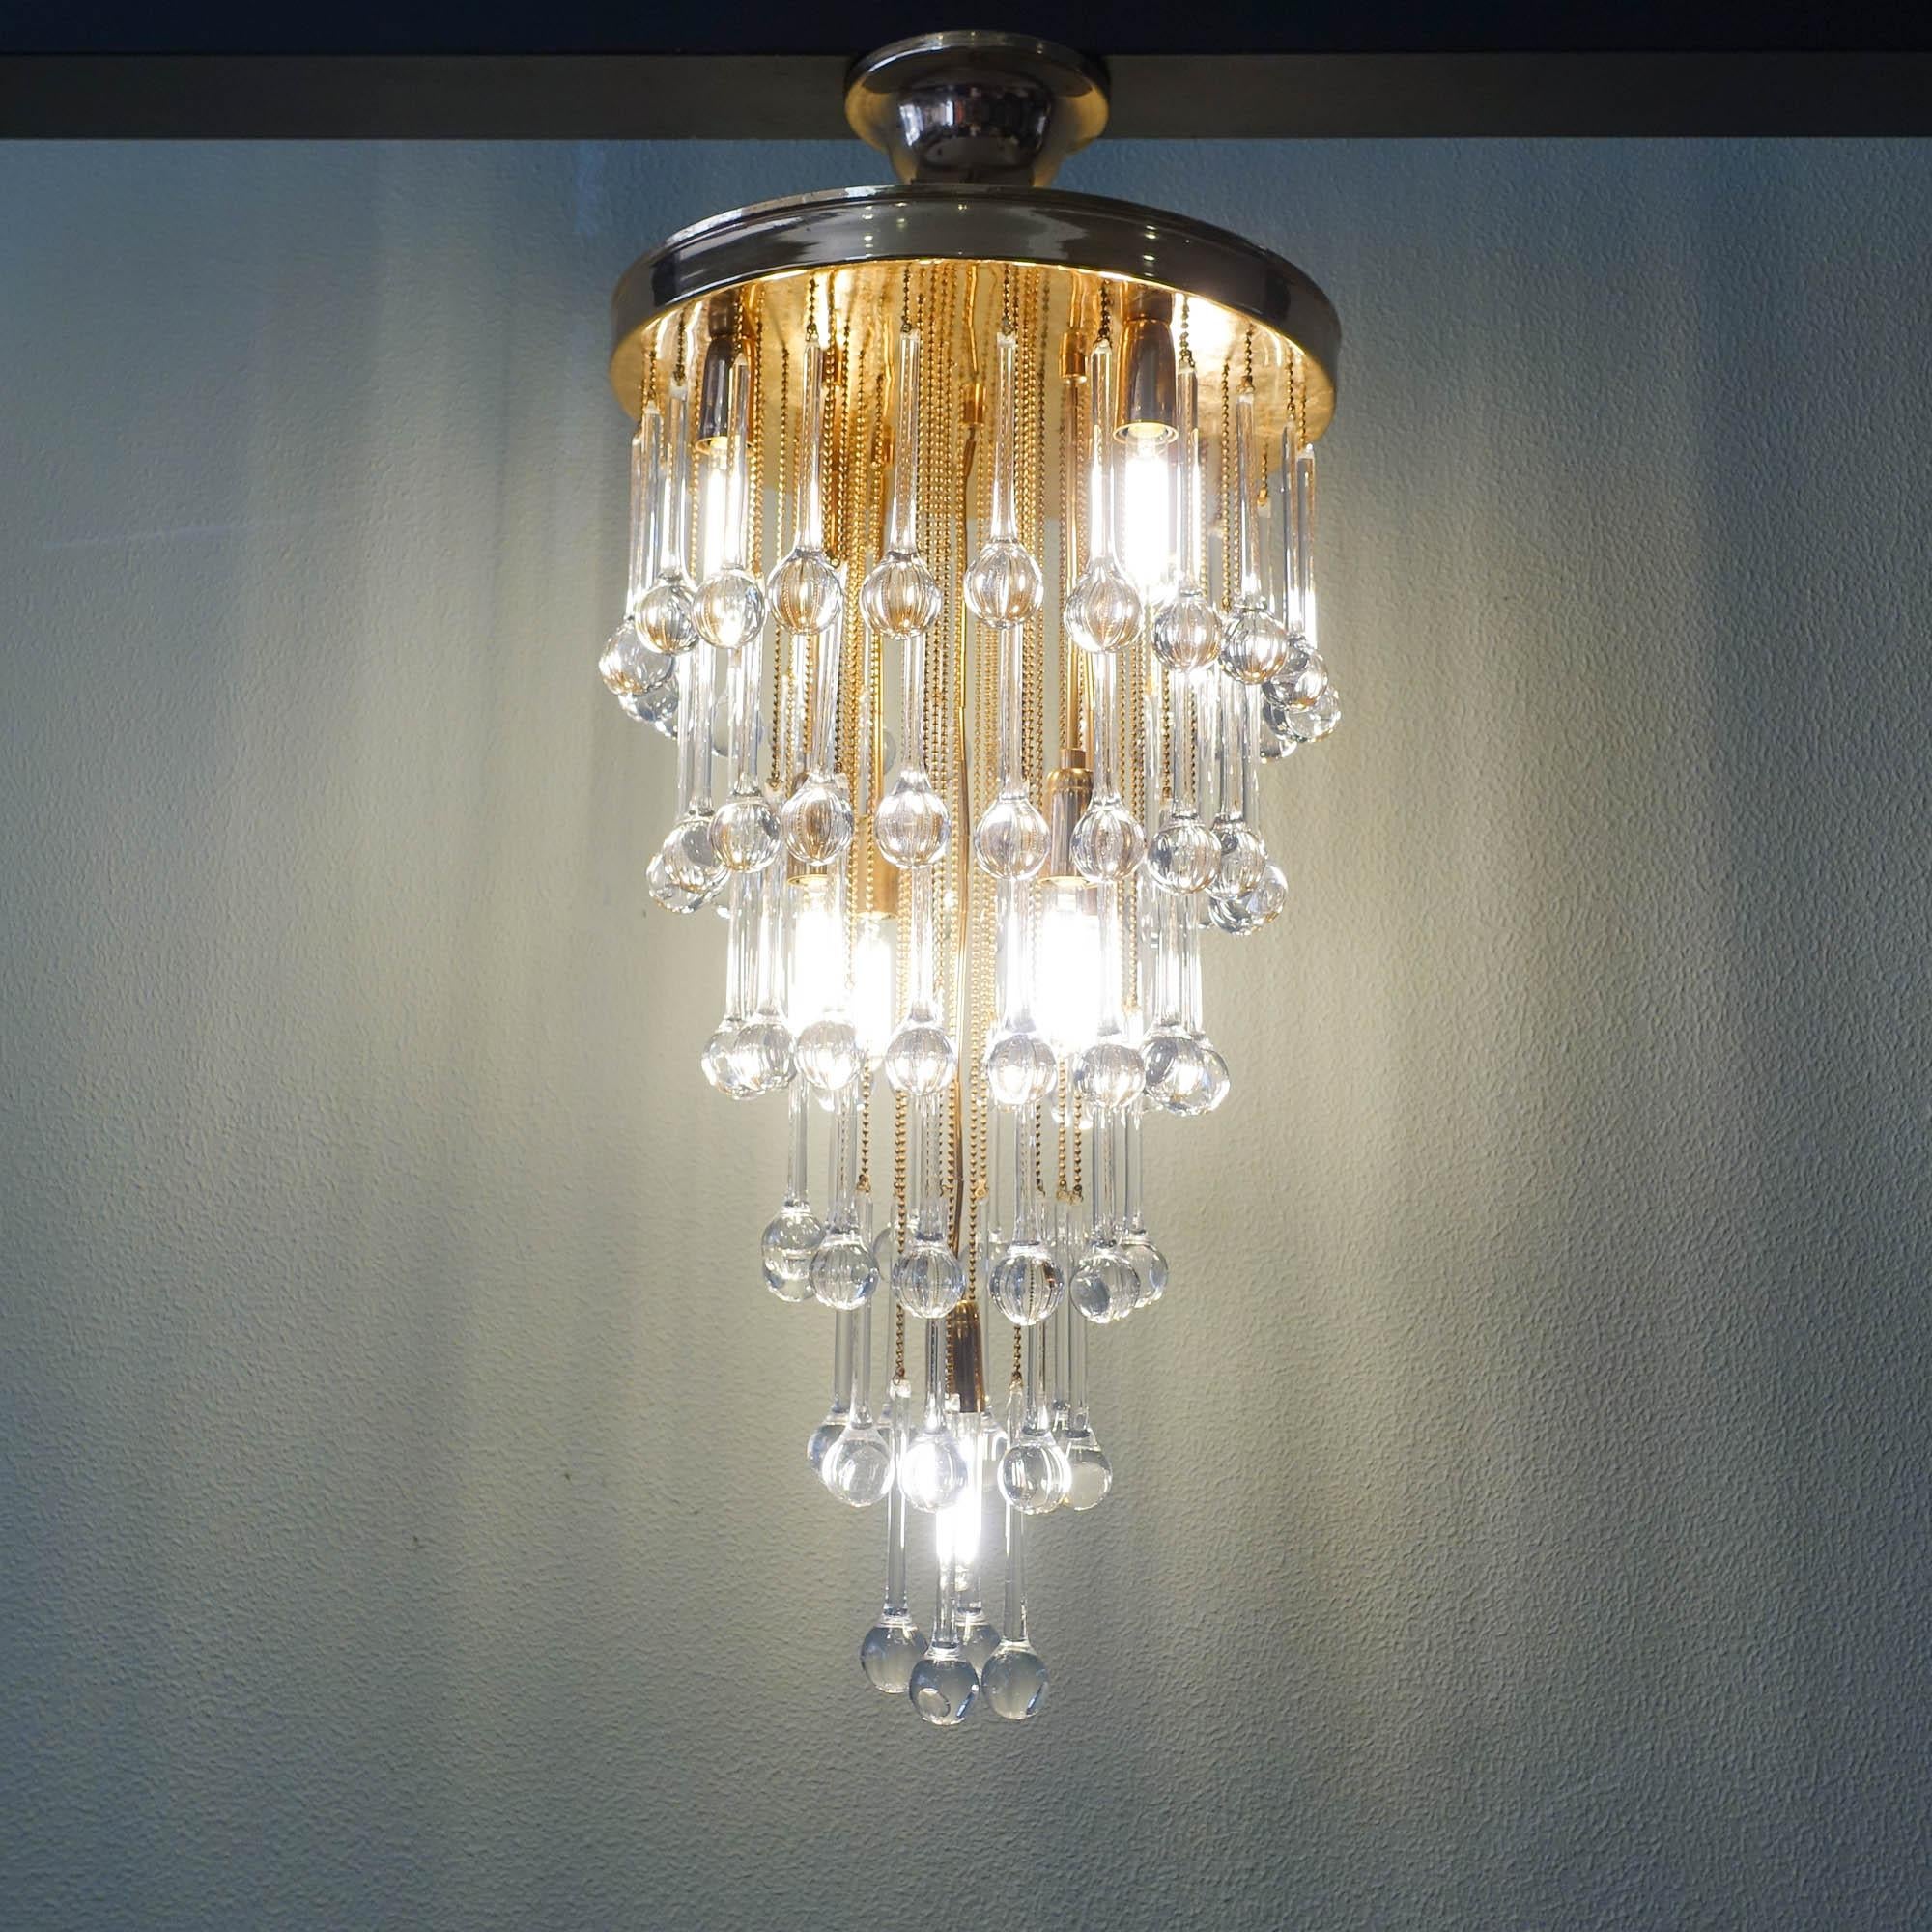 This chandelier was designed and produced by Cristaluz, in Portugal, during the 1970's. The design is very similar to the ones produced in Italy by Venini. It features a brass plate were dozens of crystal drops fall creating a layering effect with